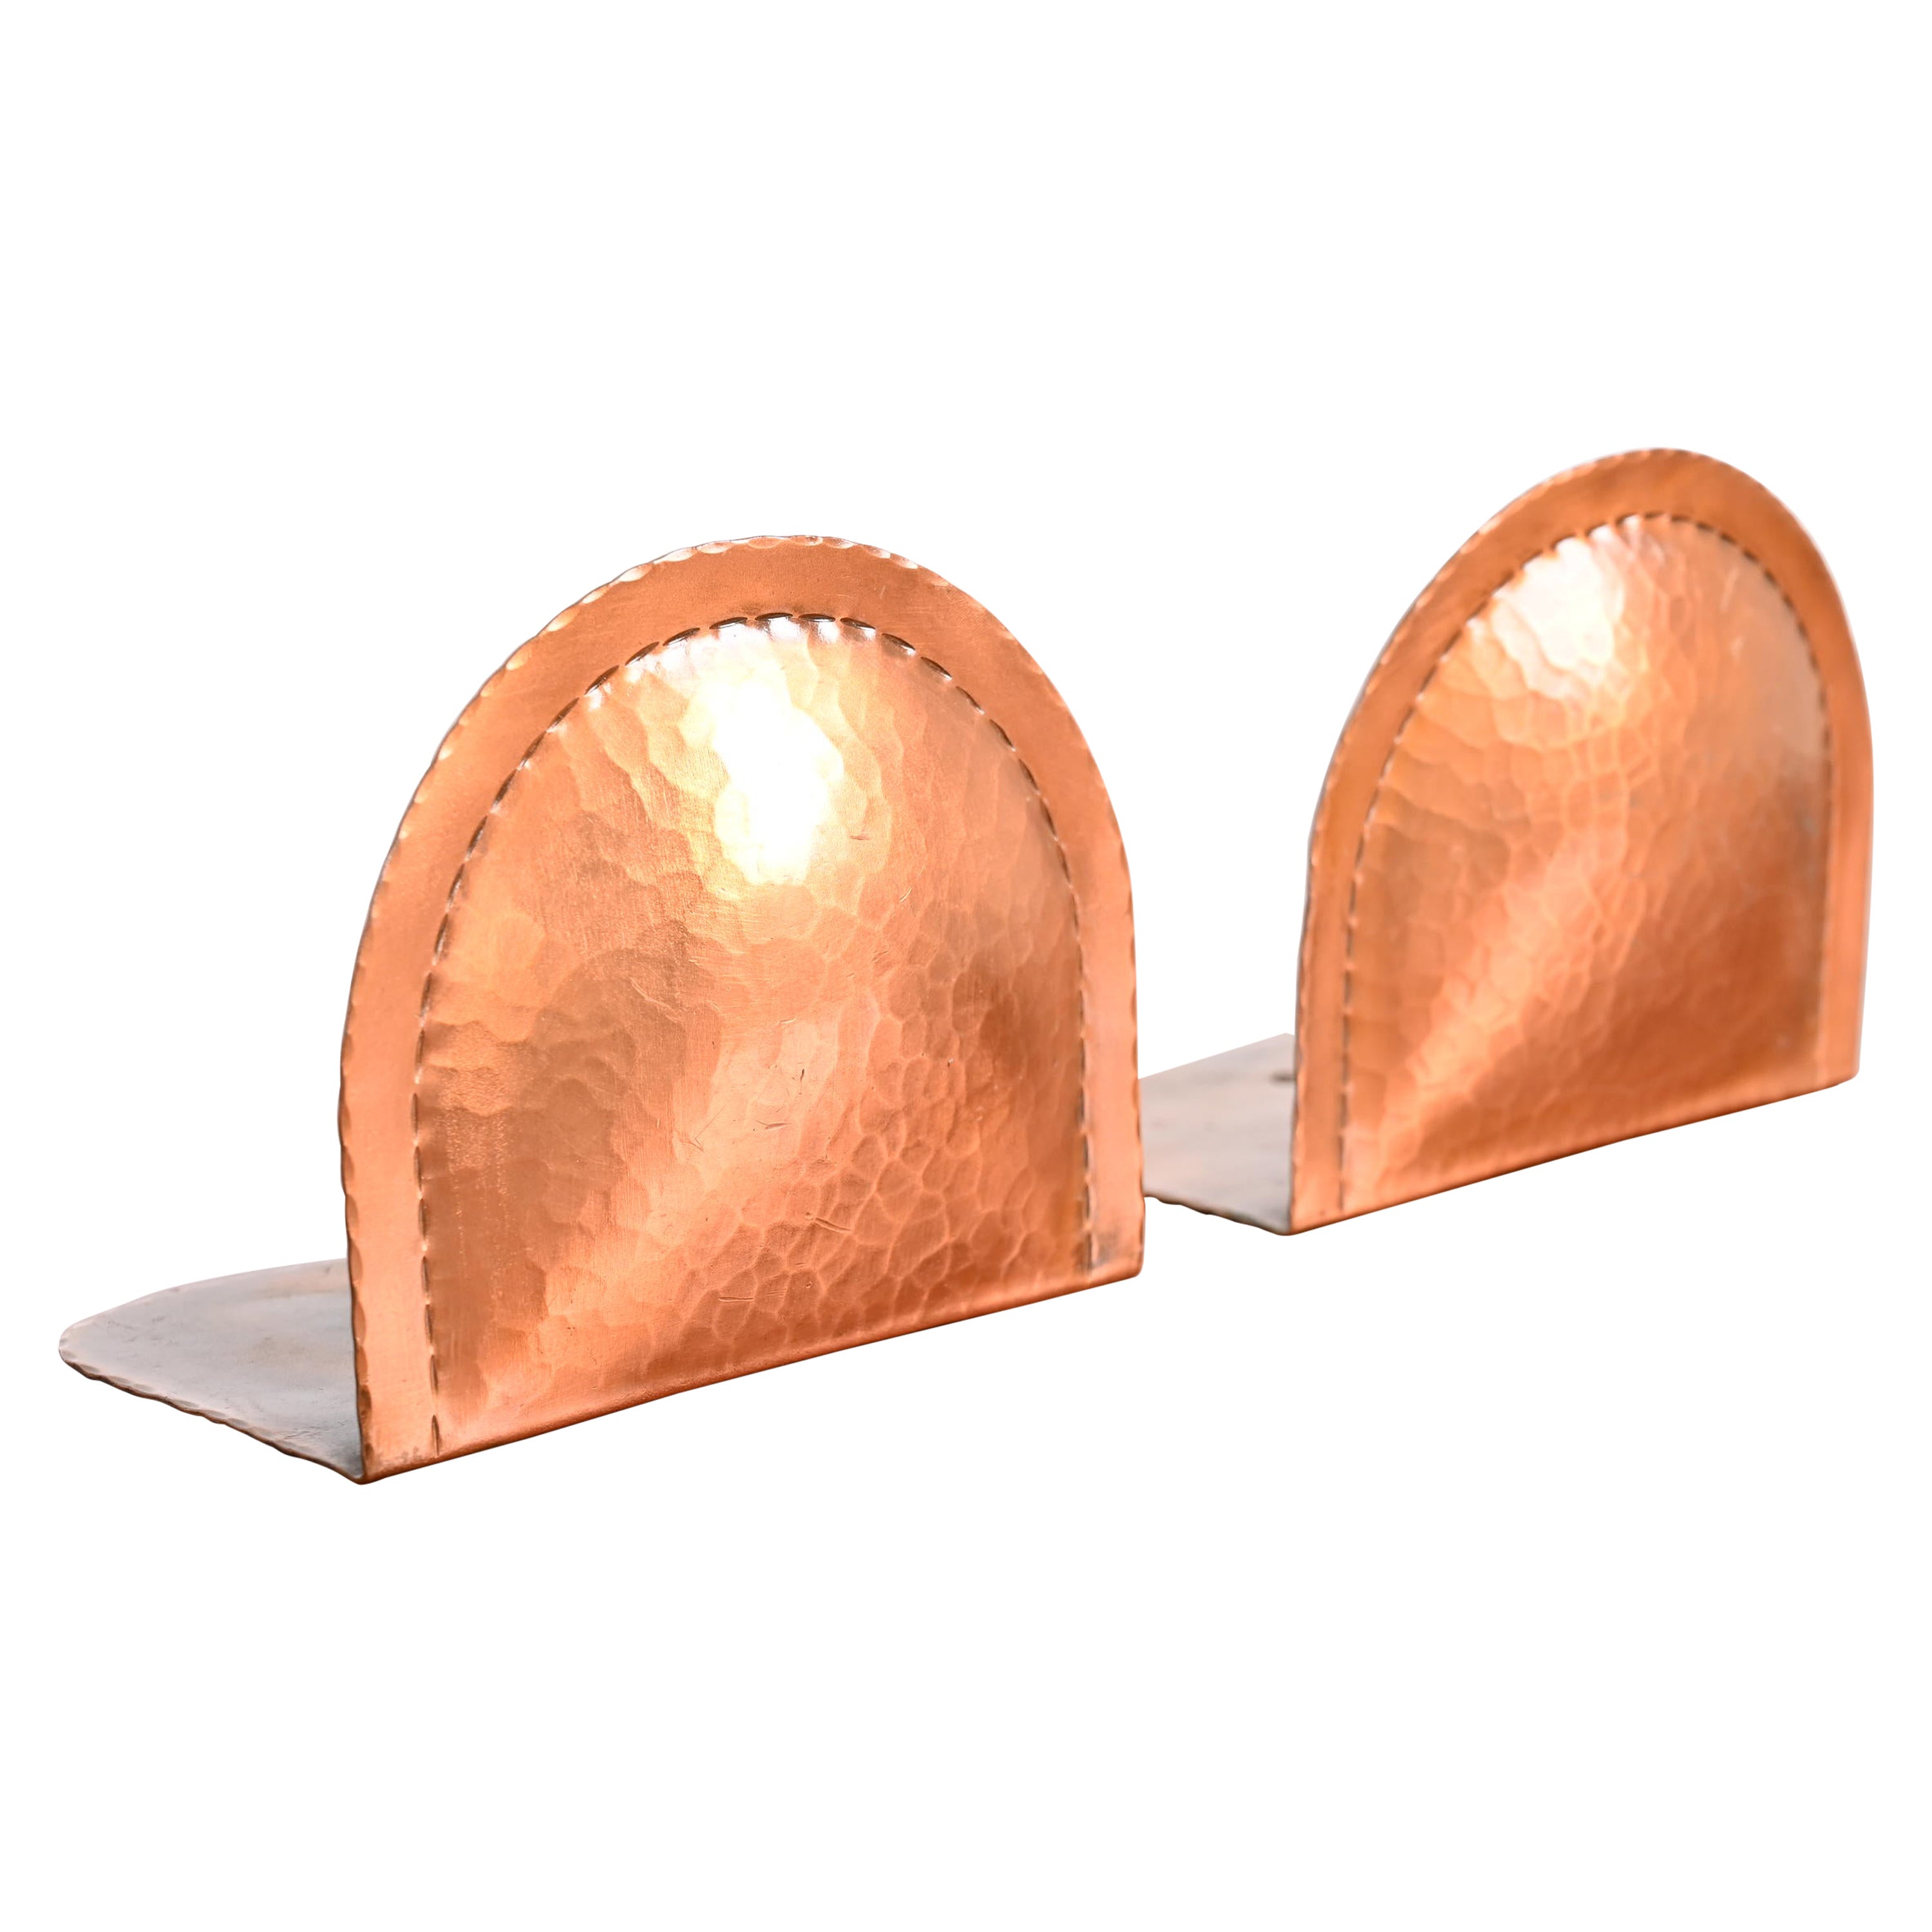 Roycroft Arts & Crafts Hammered Copper Bookends, Pair